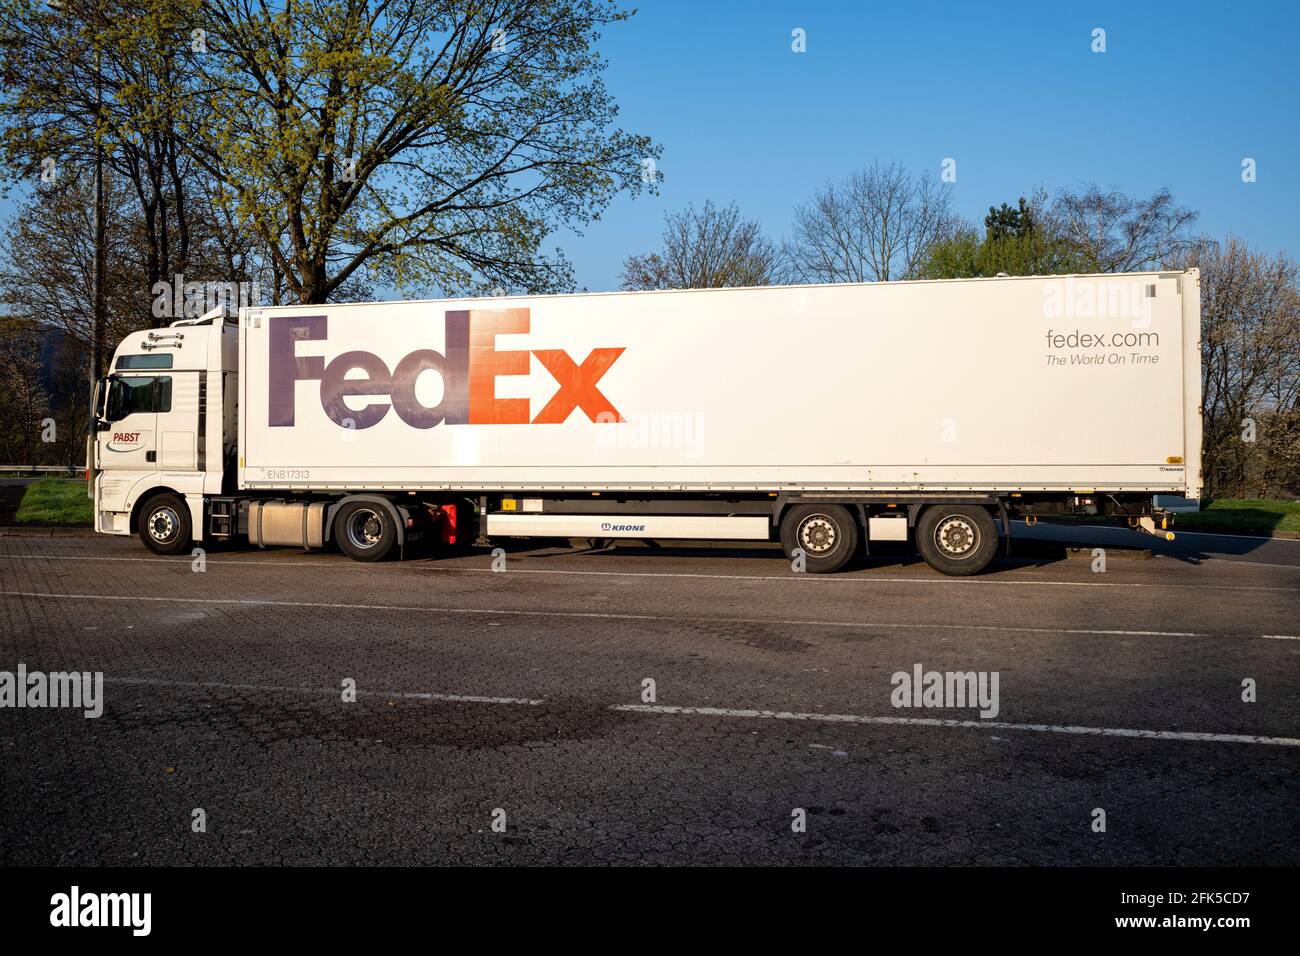 Pabst MAN TGX truck with FedEx trailer at motorway rest area. Stock Photo